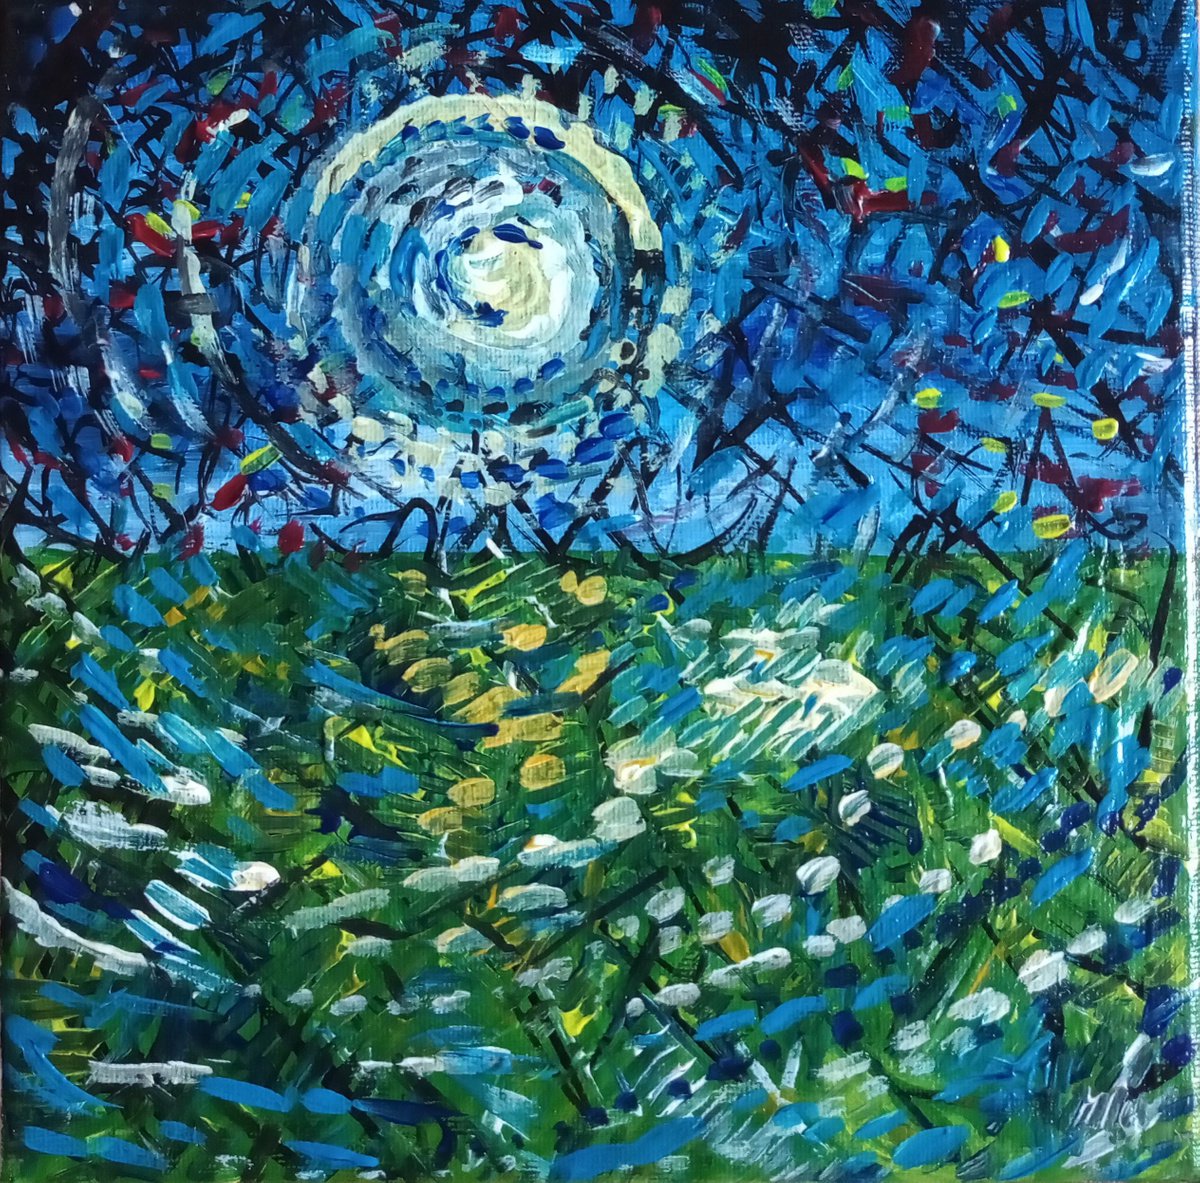 Night Field - Abstract Landscape Original Art Painting by Spencer Derry ART